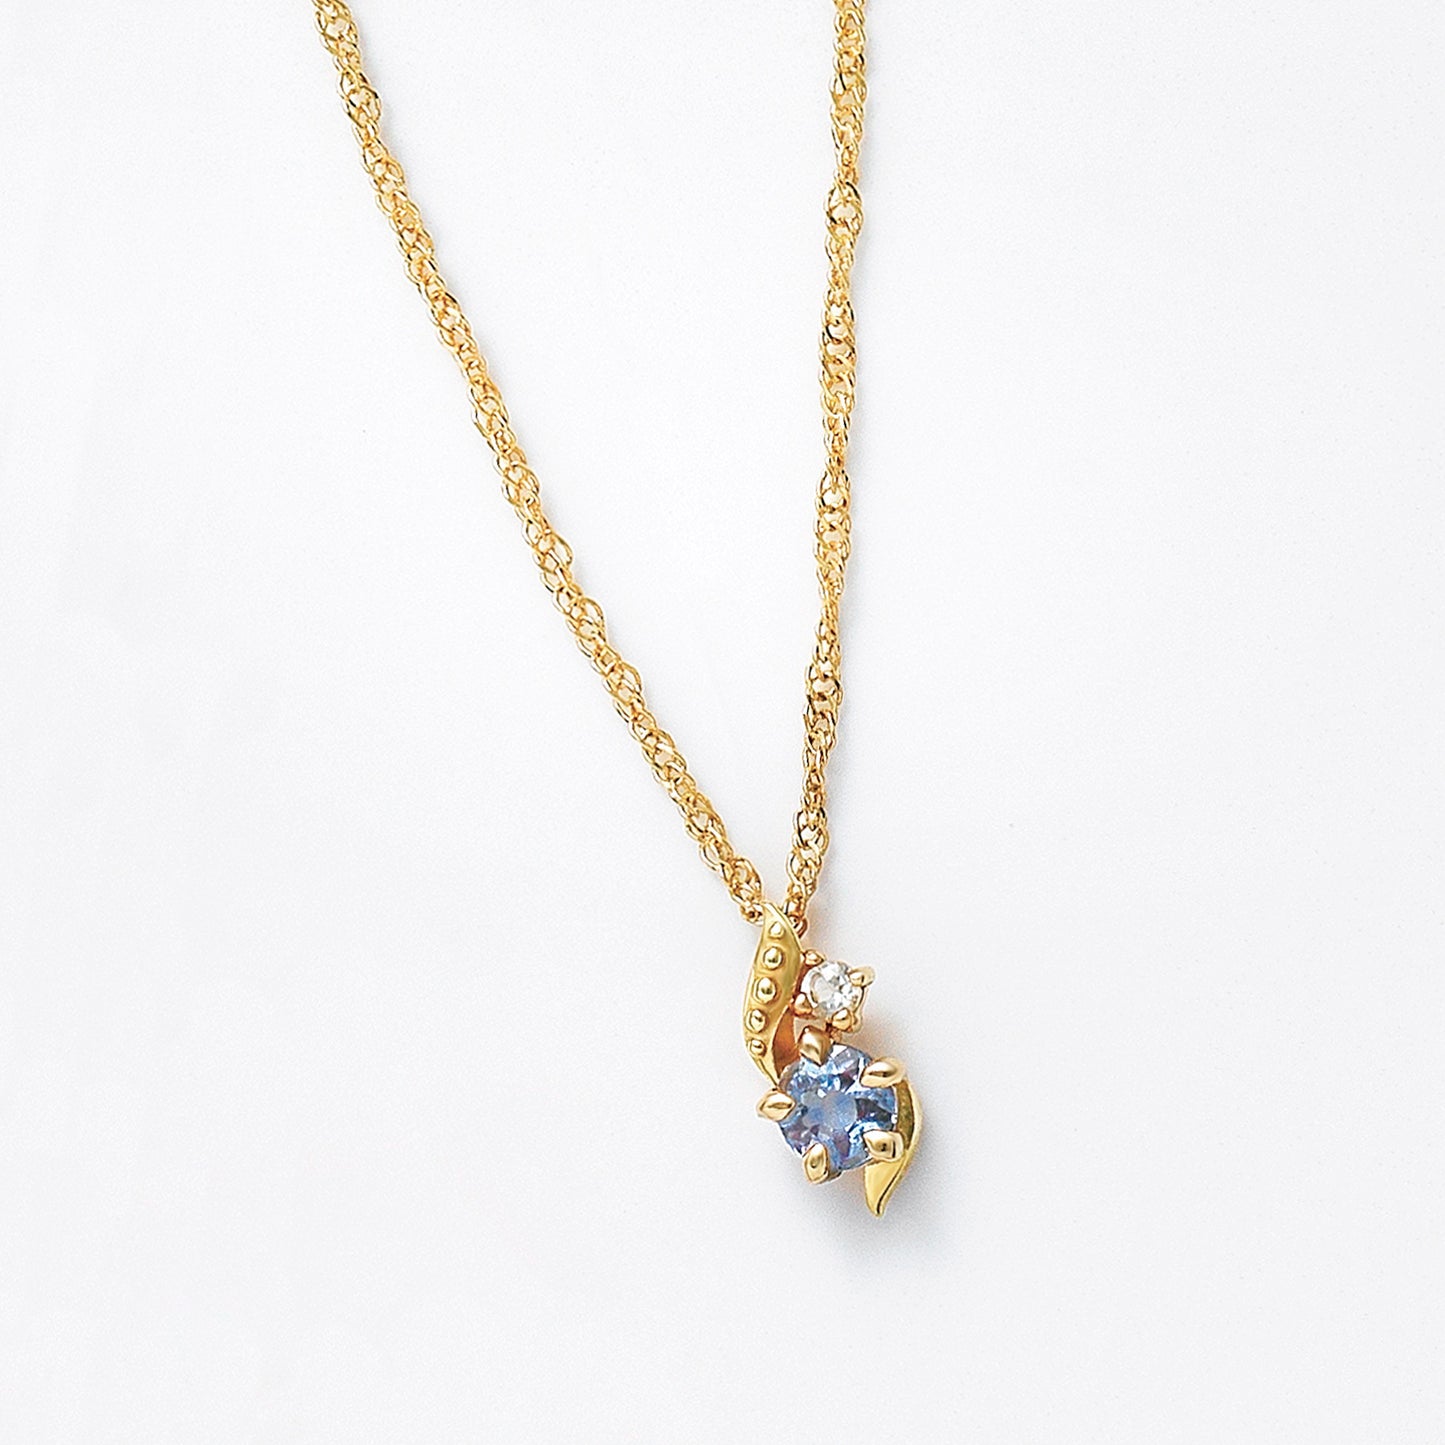 10K Tanzanite Comet Necklace (Yellow Gold) - Product Image